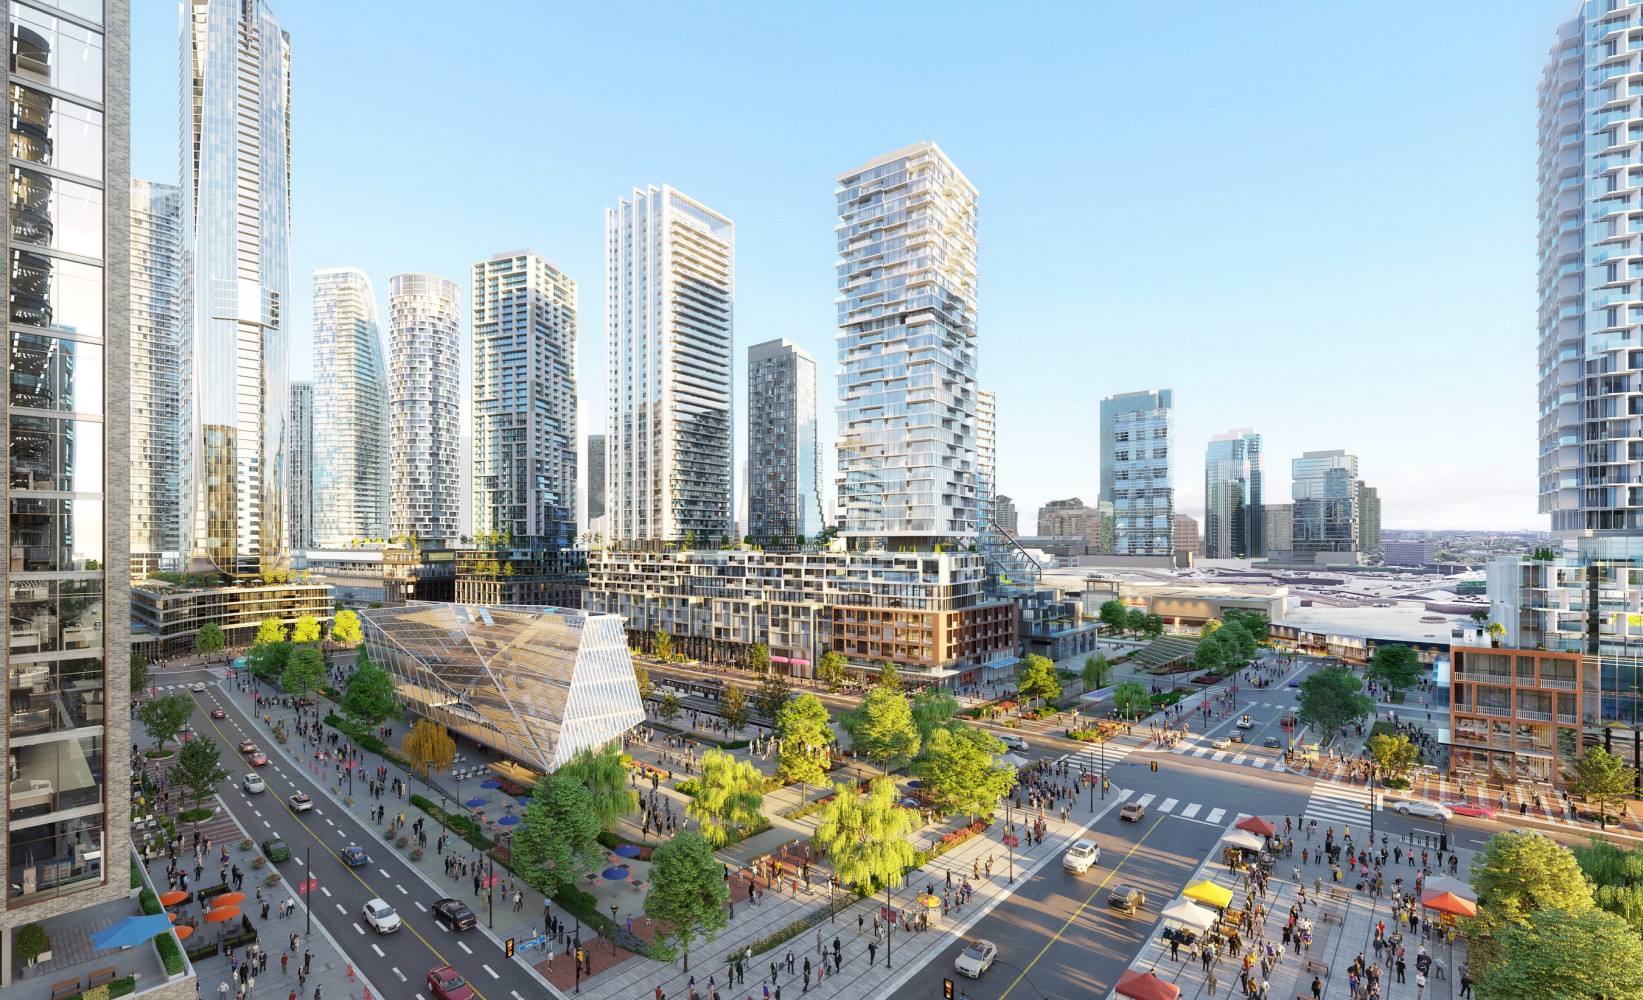 A massive development will change downtown Mississauga forever, bringing offices and residential units to its urban core